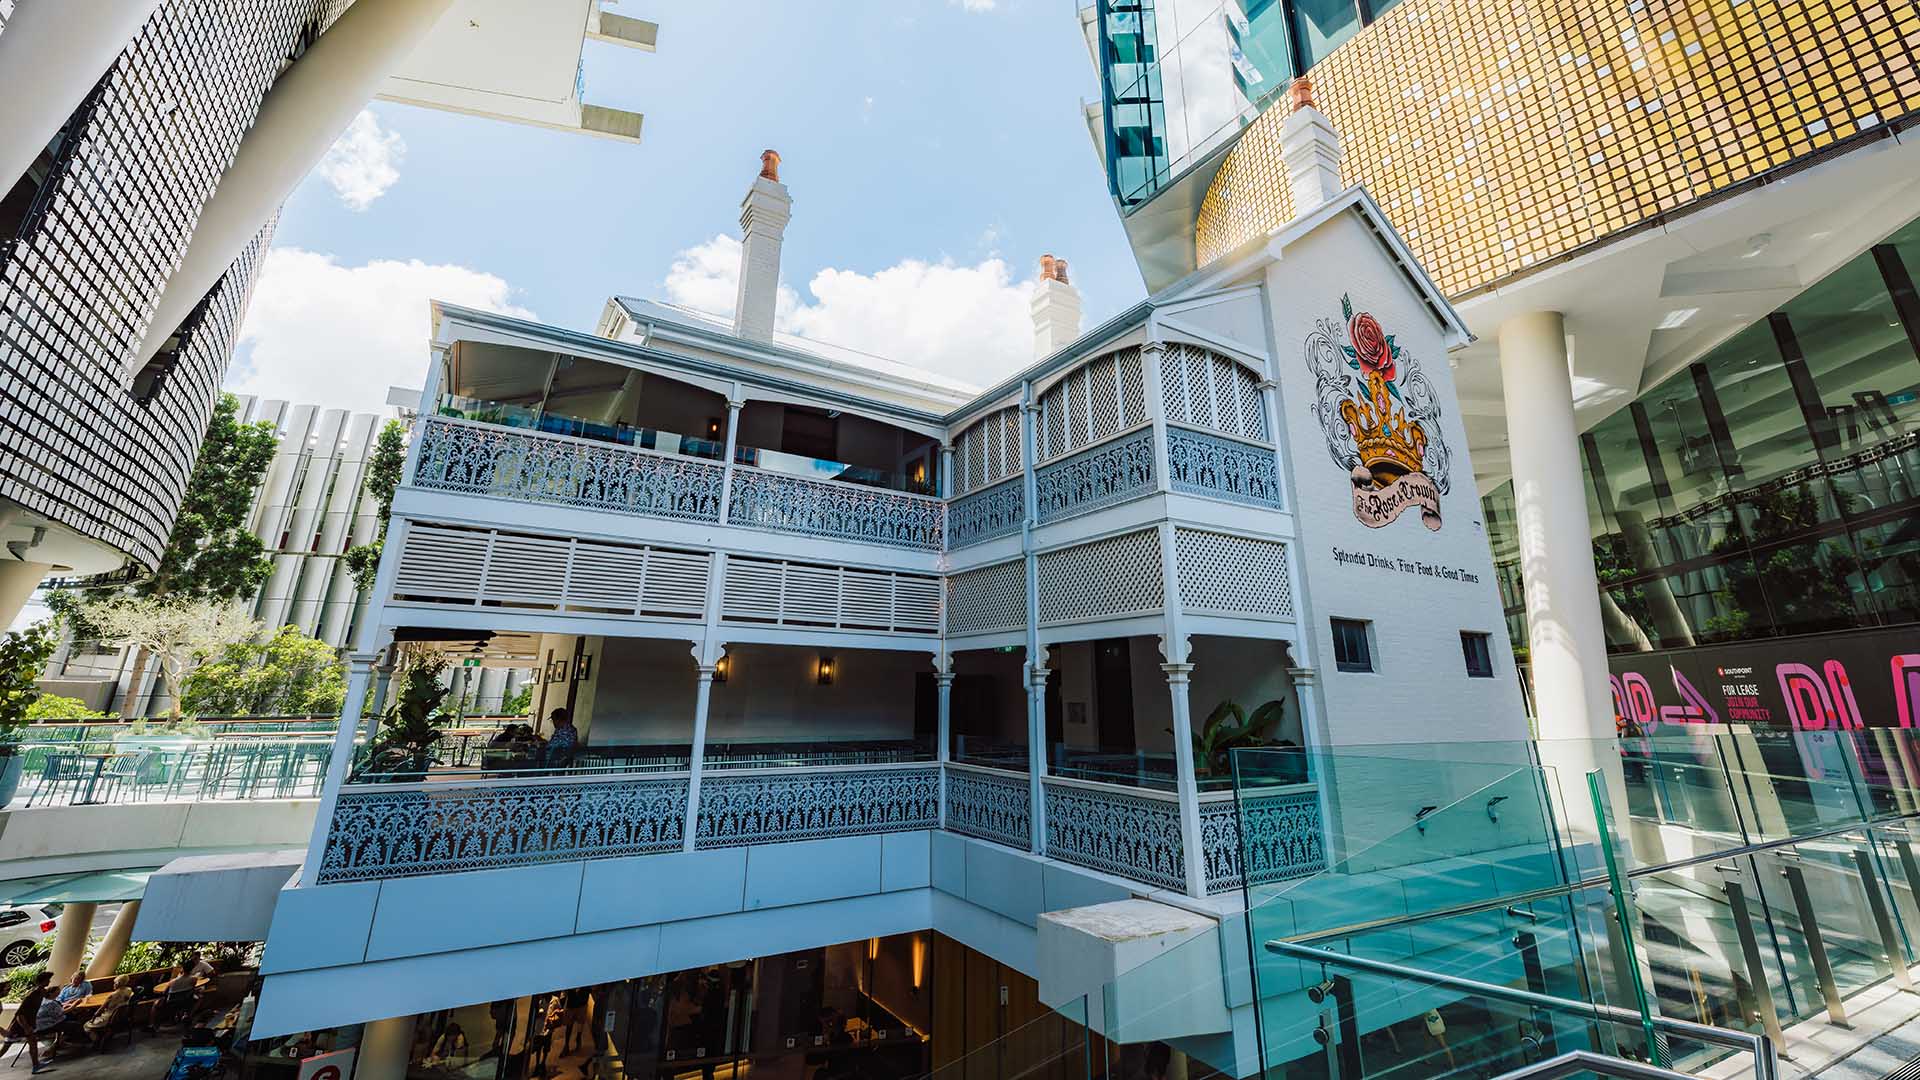 Now Open: The Rose & Crown Is South Bank's New London-Inspired Pub That's Taken Over Little Big House's Old Digs